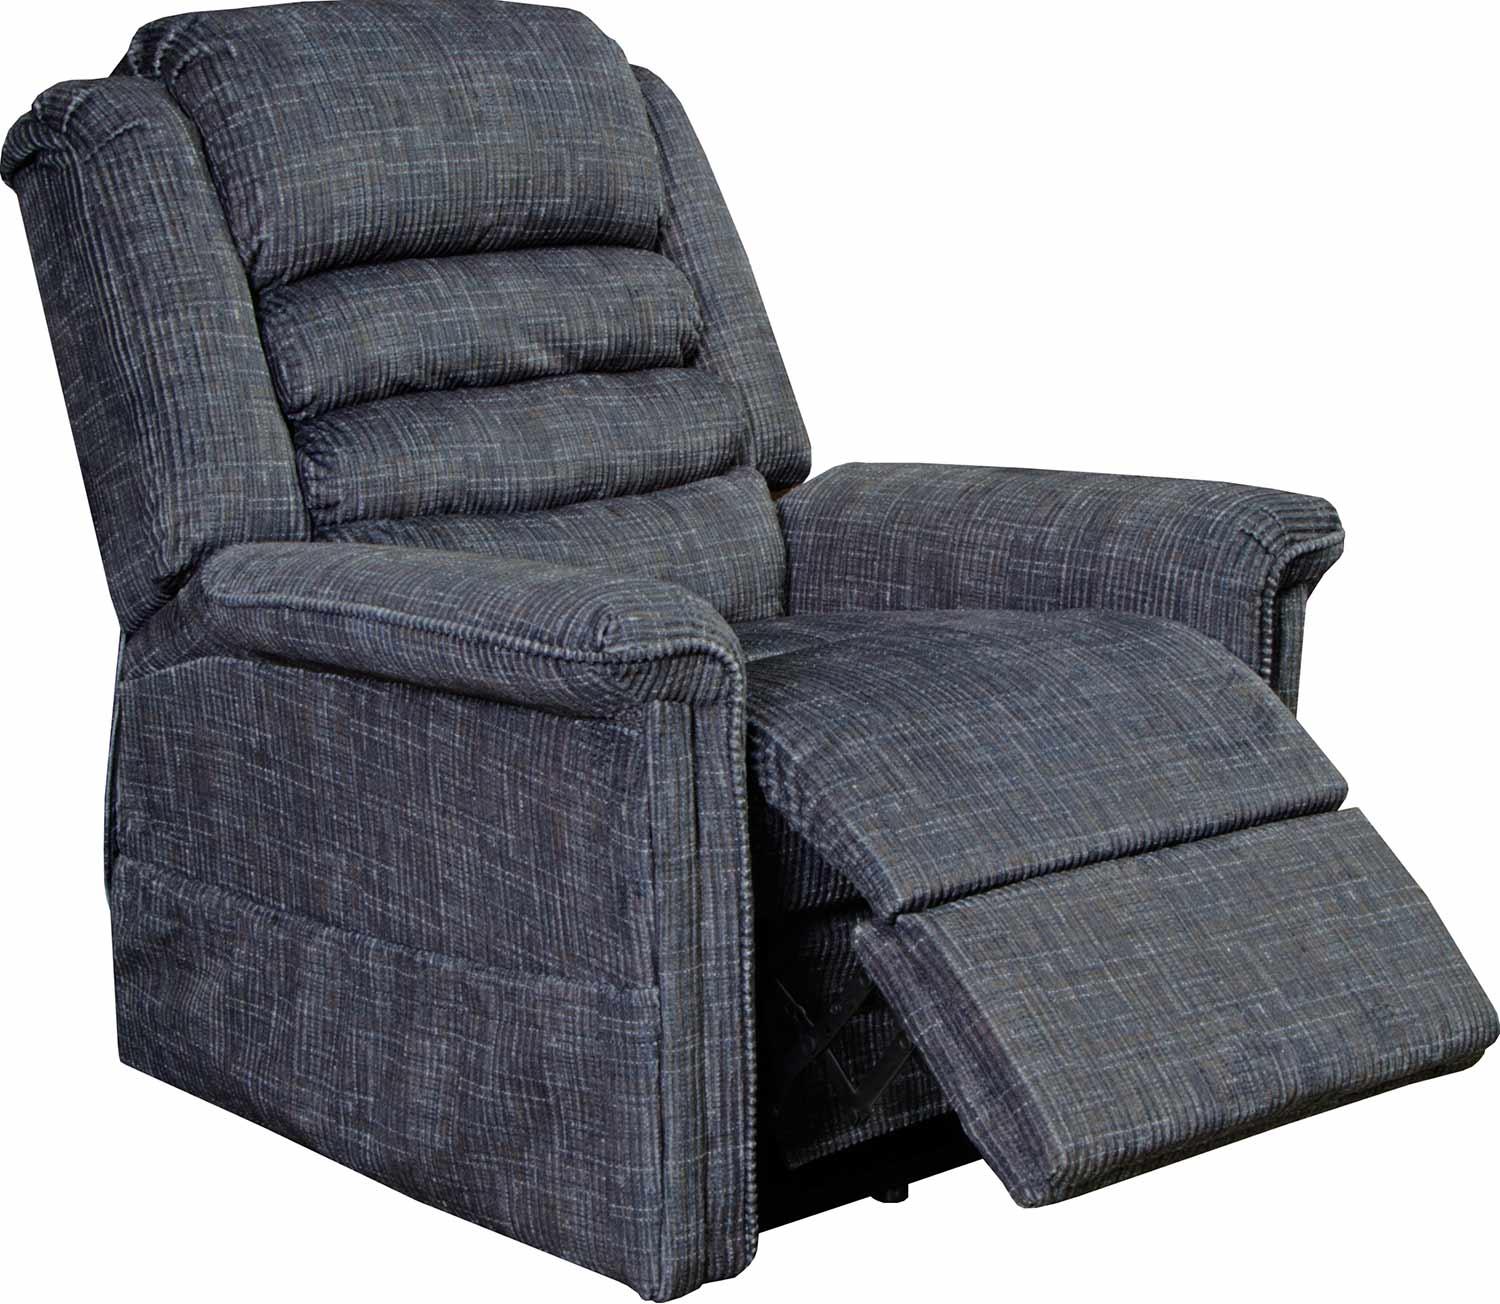 CatNapper Soother Power Lift Recliner Chair - Smoke